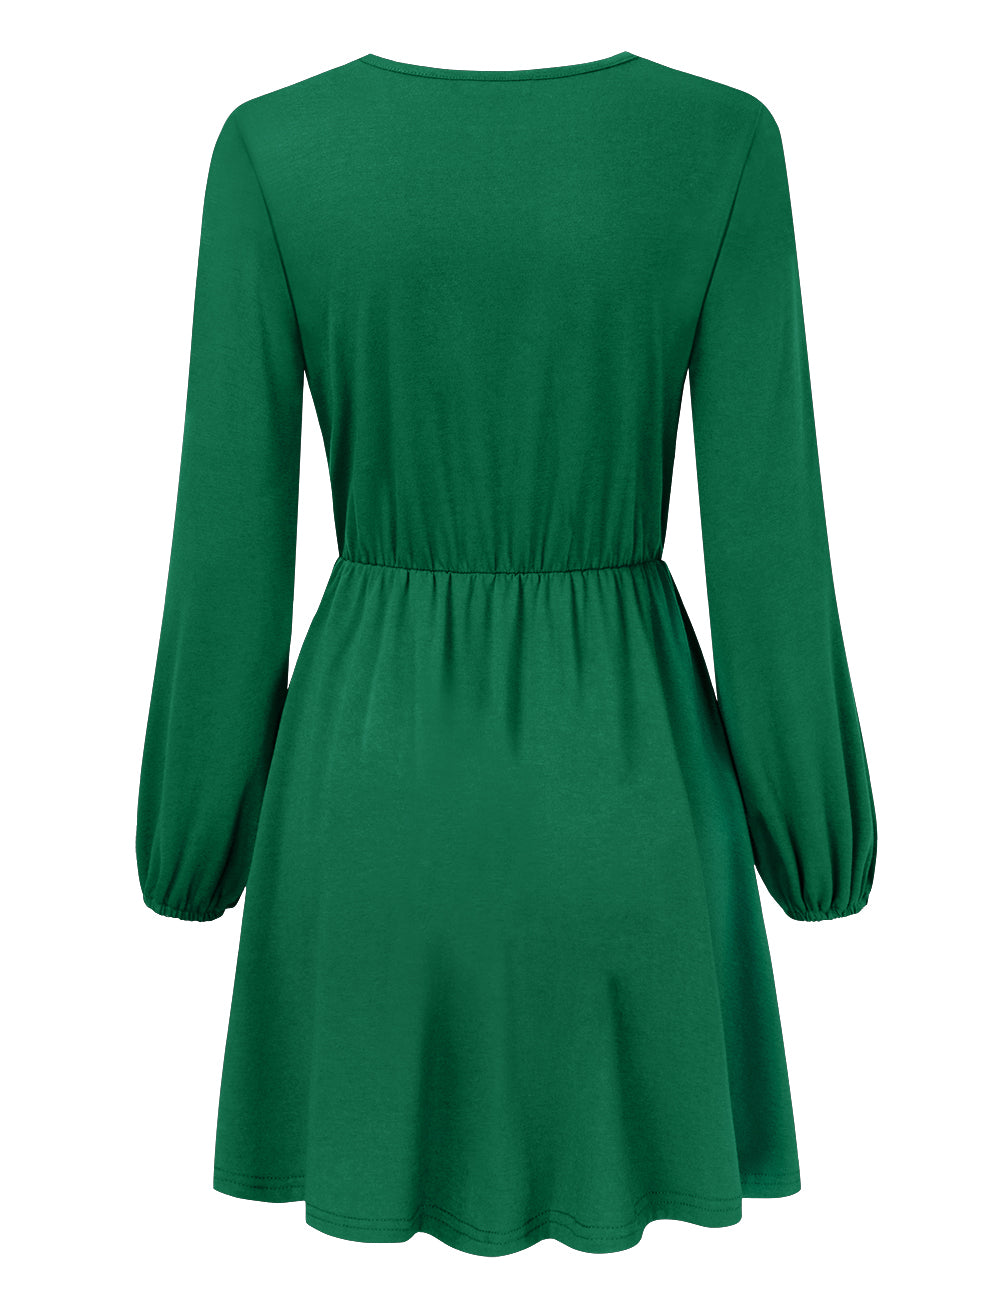 YESFASHION Women V-Neck Business Casual Party Mini Dress Green